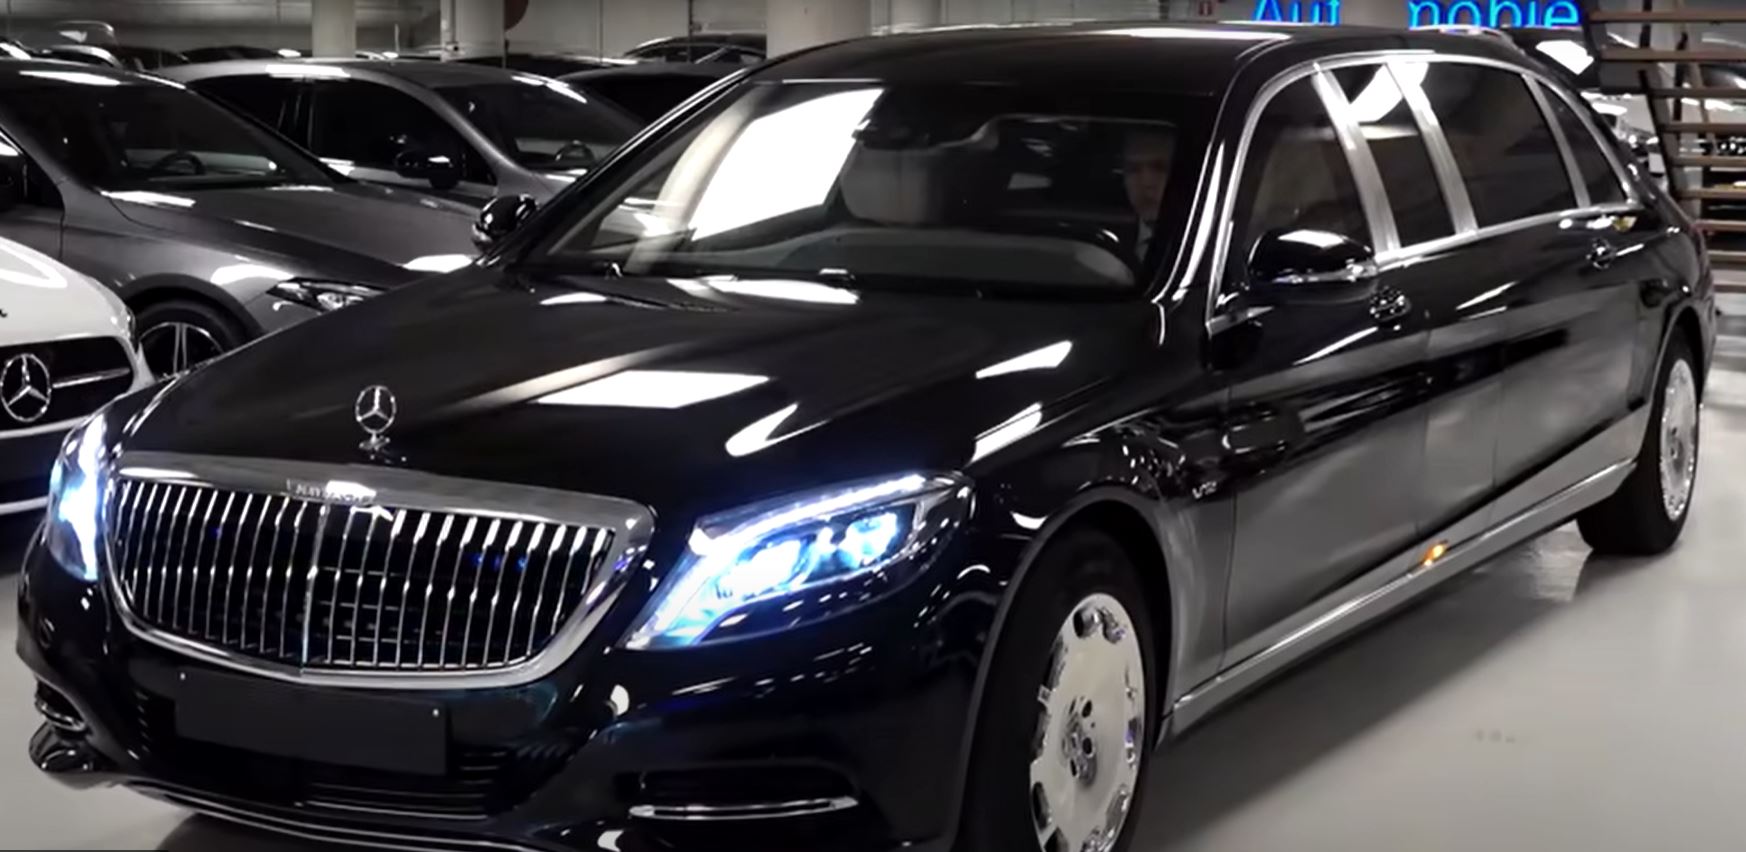 A black limousine is parked in a parking garage